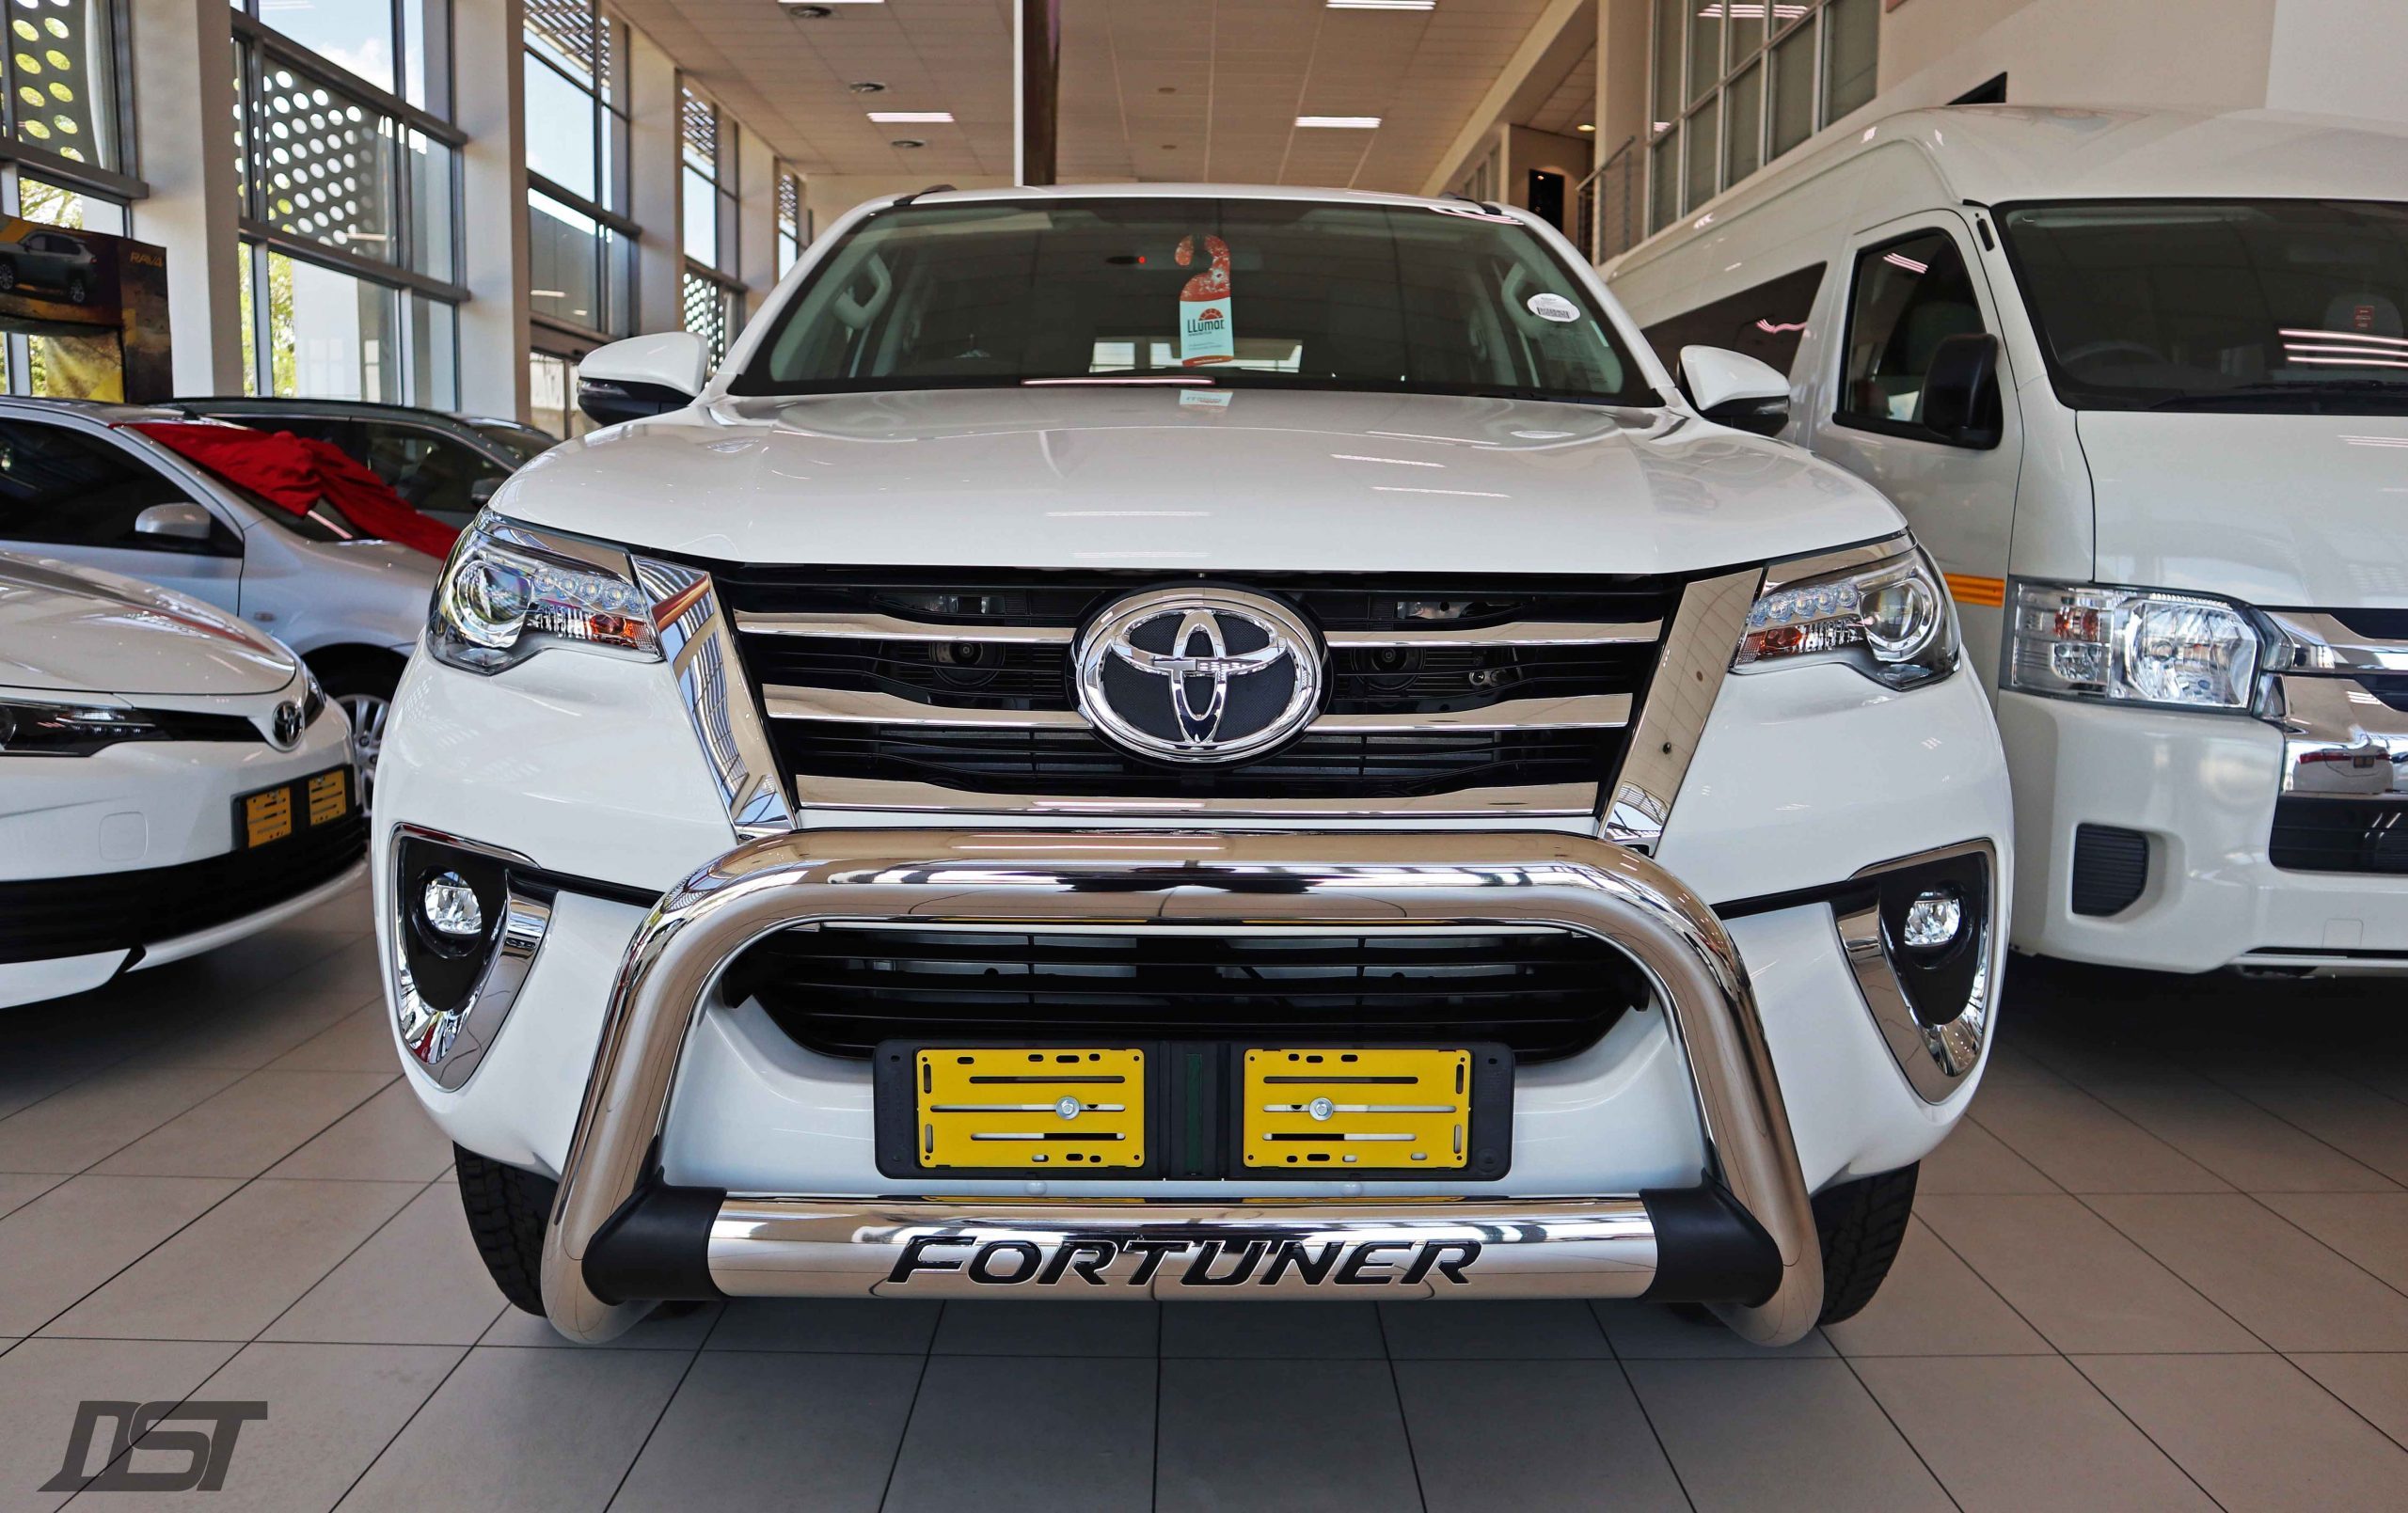 Toyota Fortuner 2.8 GD6 Fierce Edition front view